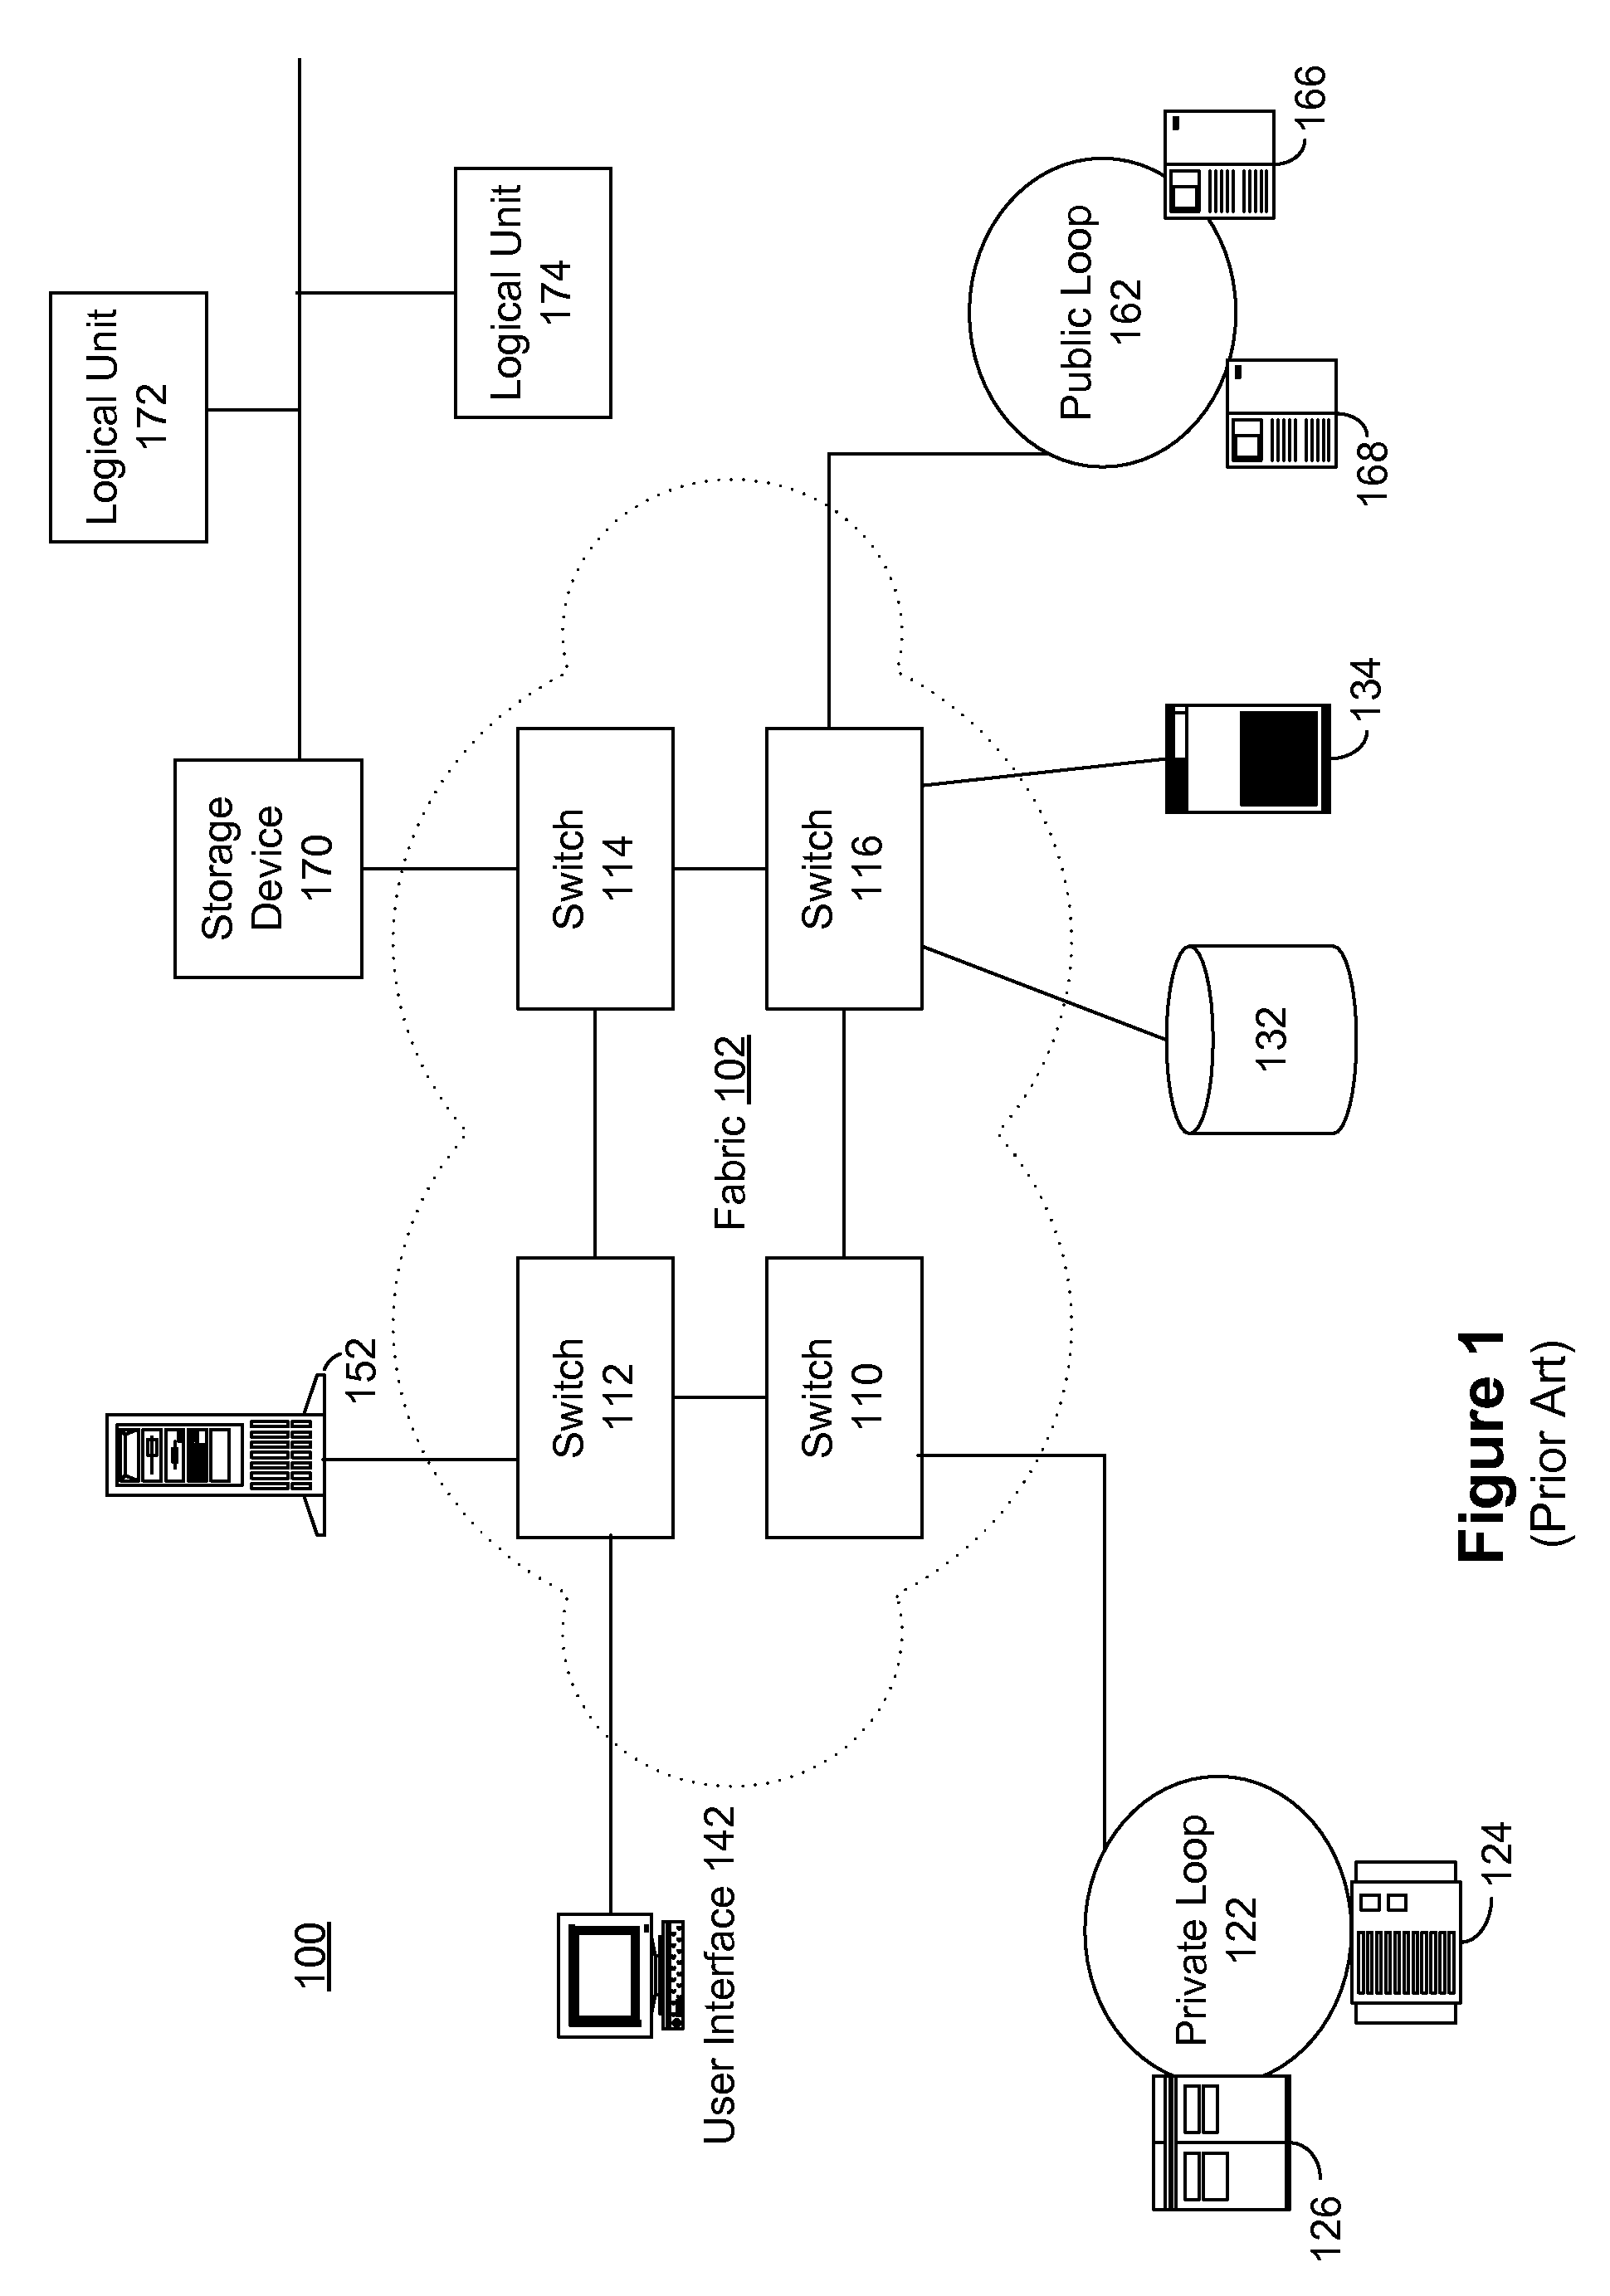 Method and apparatus for determining bandwidth-consuming frame flows in a network